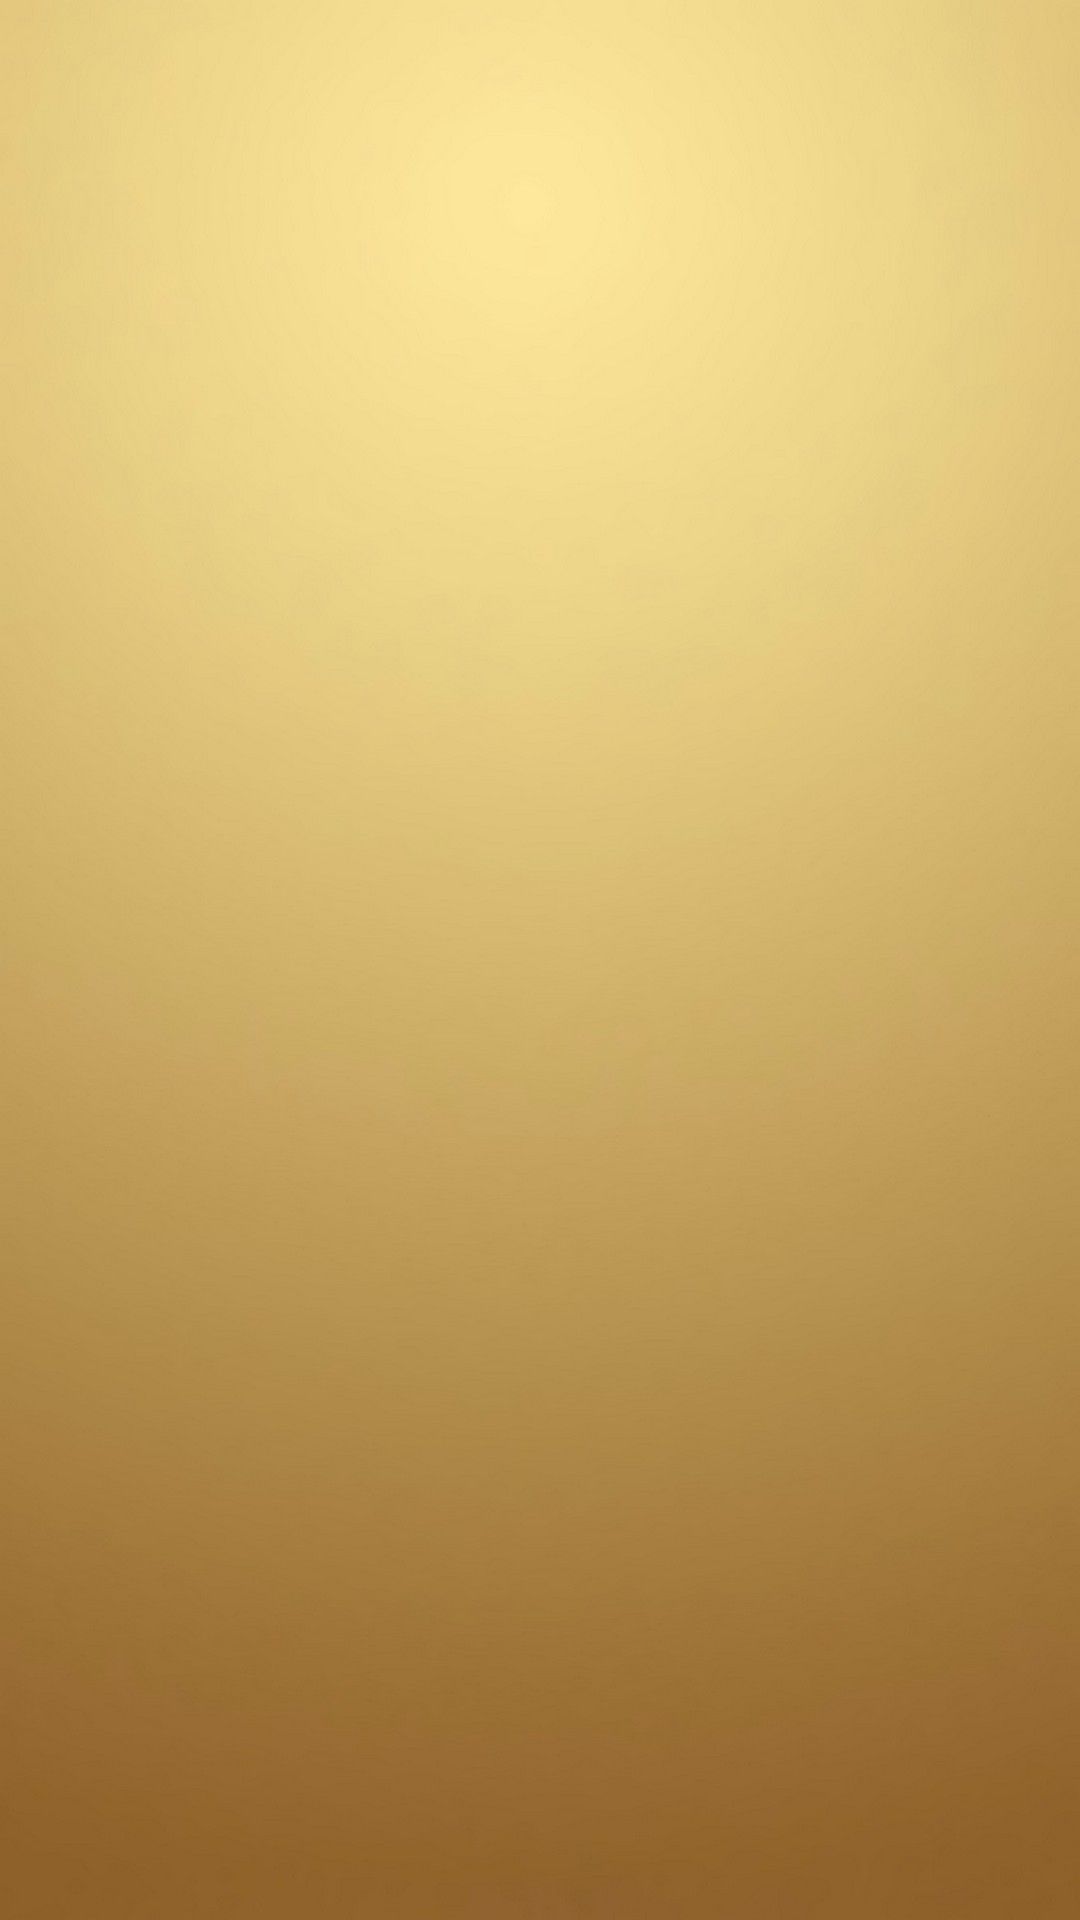 Wallpaper Gold Color Wallpapers